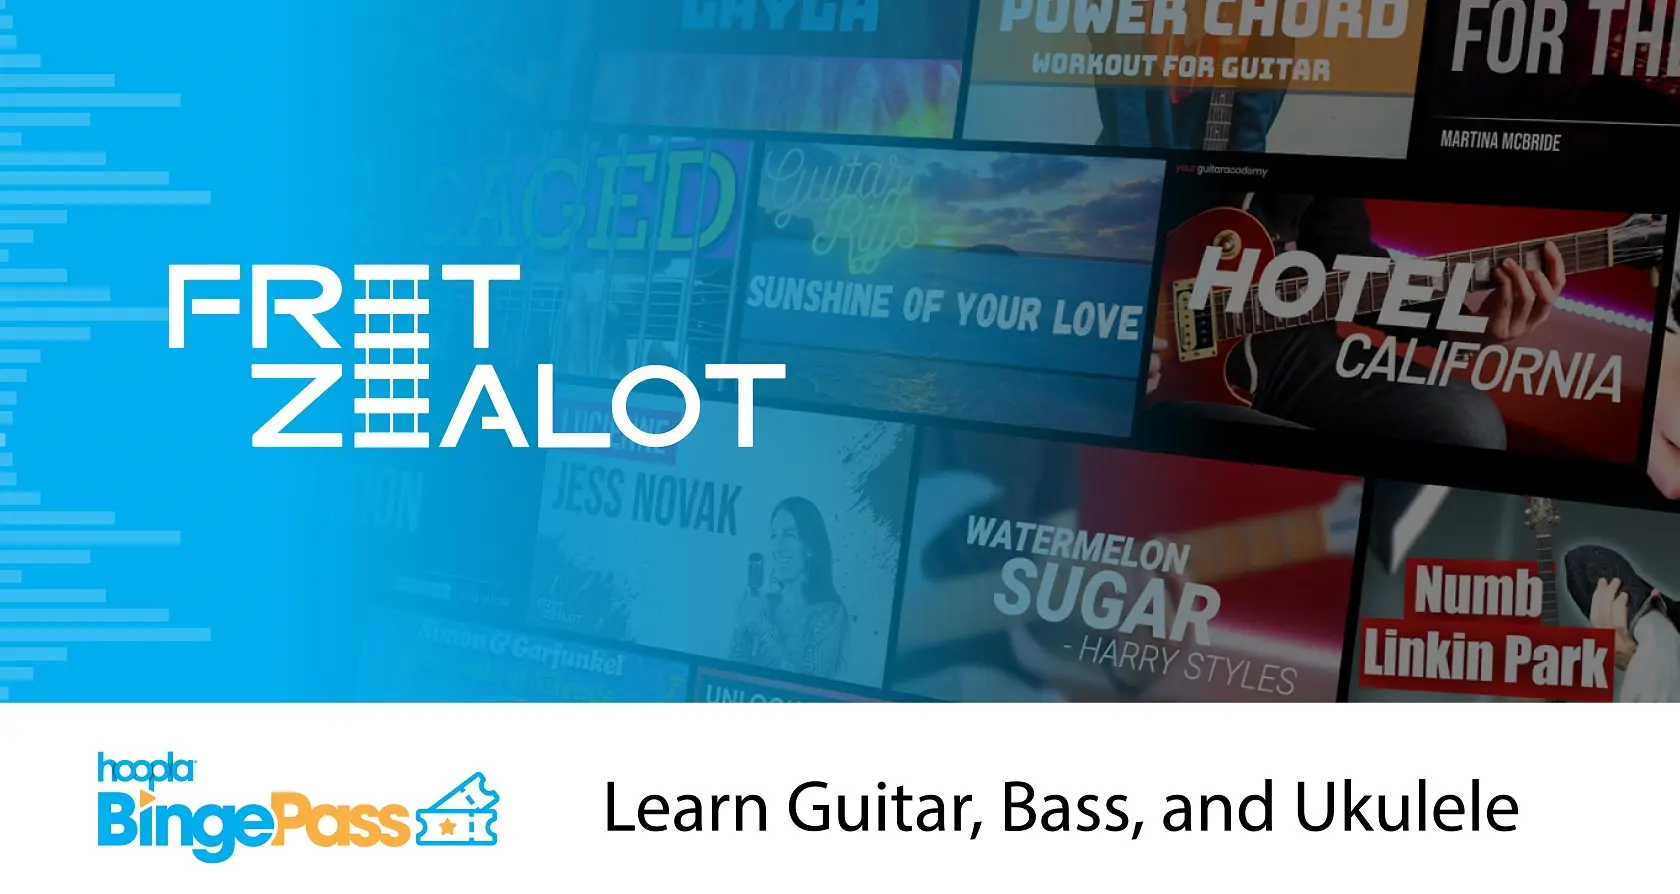 Promotional material for hoopla's Fret Zealot BingePass, to learn guitar, bass, and ukelele.